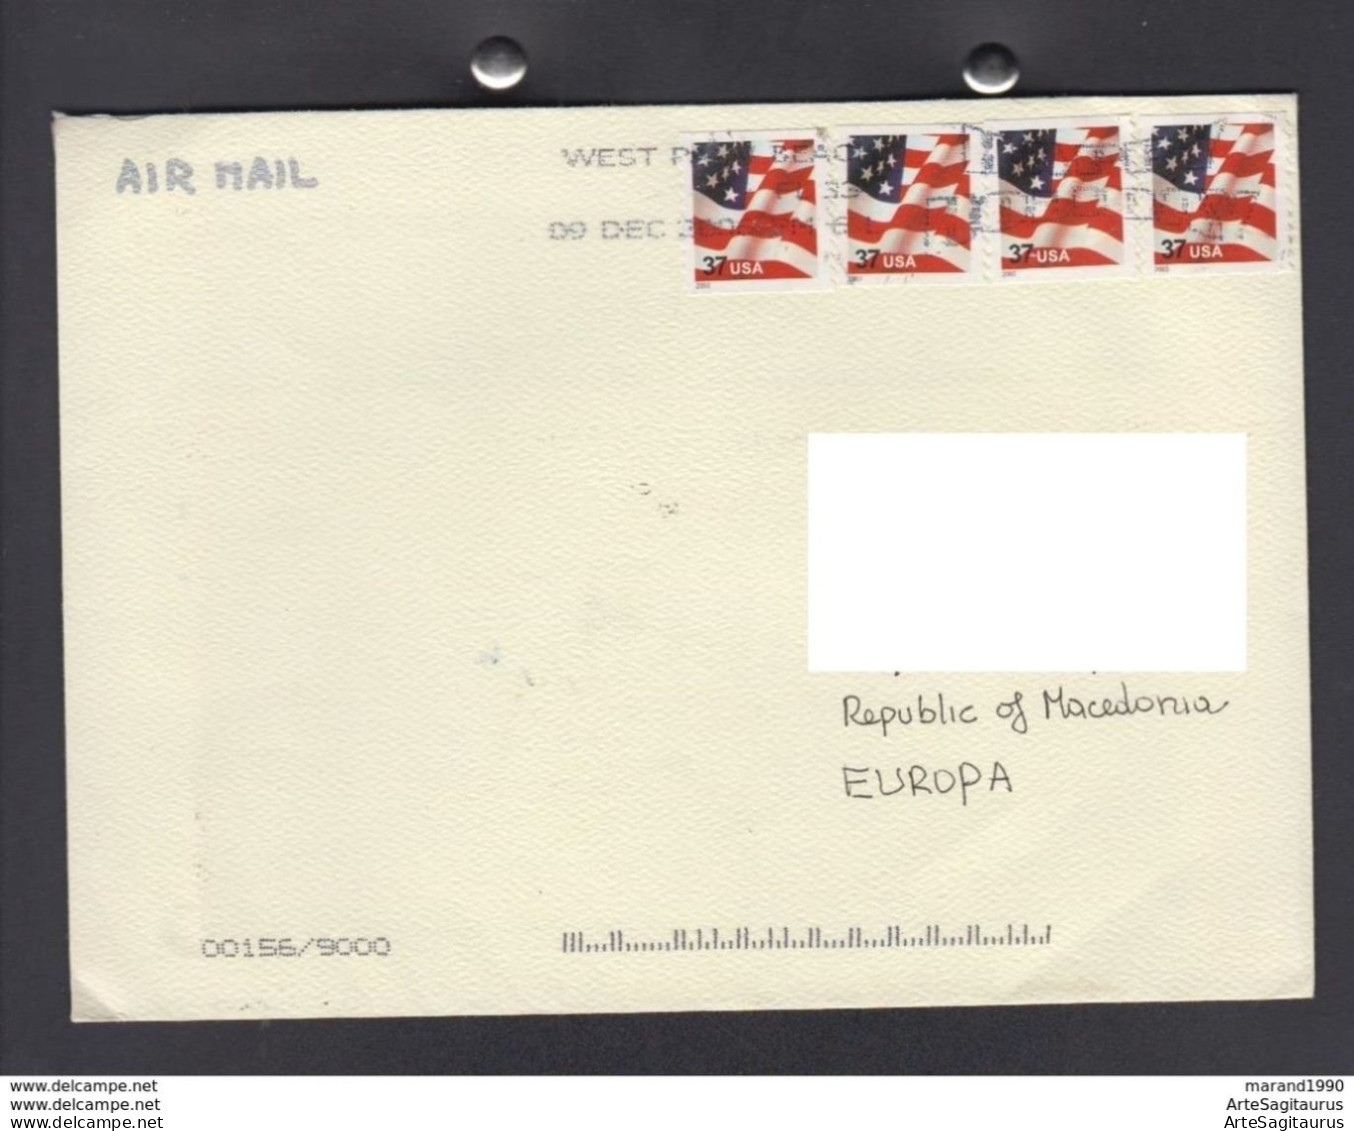 USA, COVER, AIR MAIL, FLAGS, REPUBLIC OF MACEDONIA  (008) - Buste